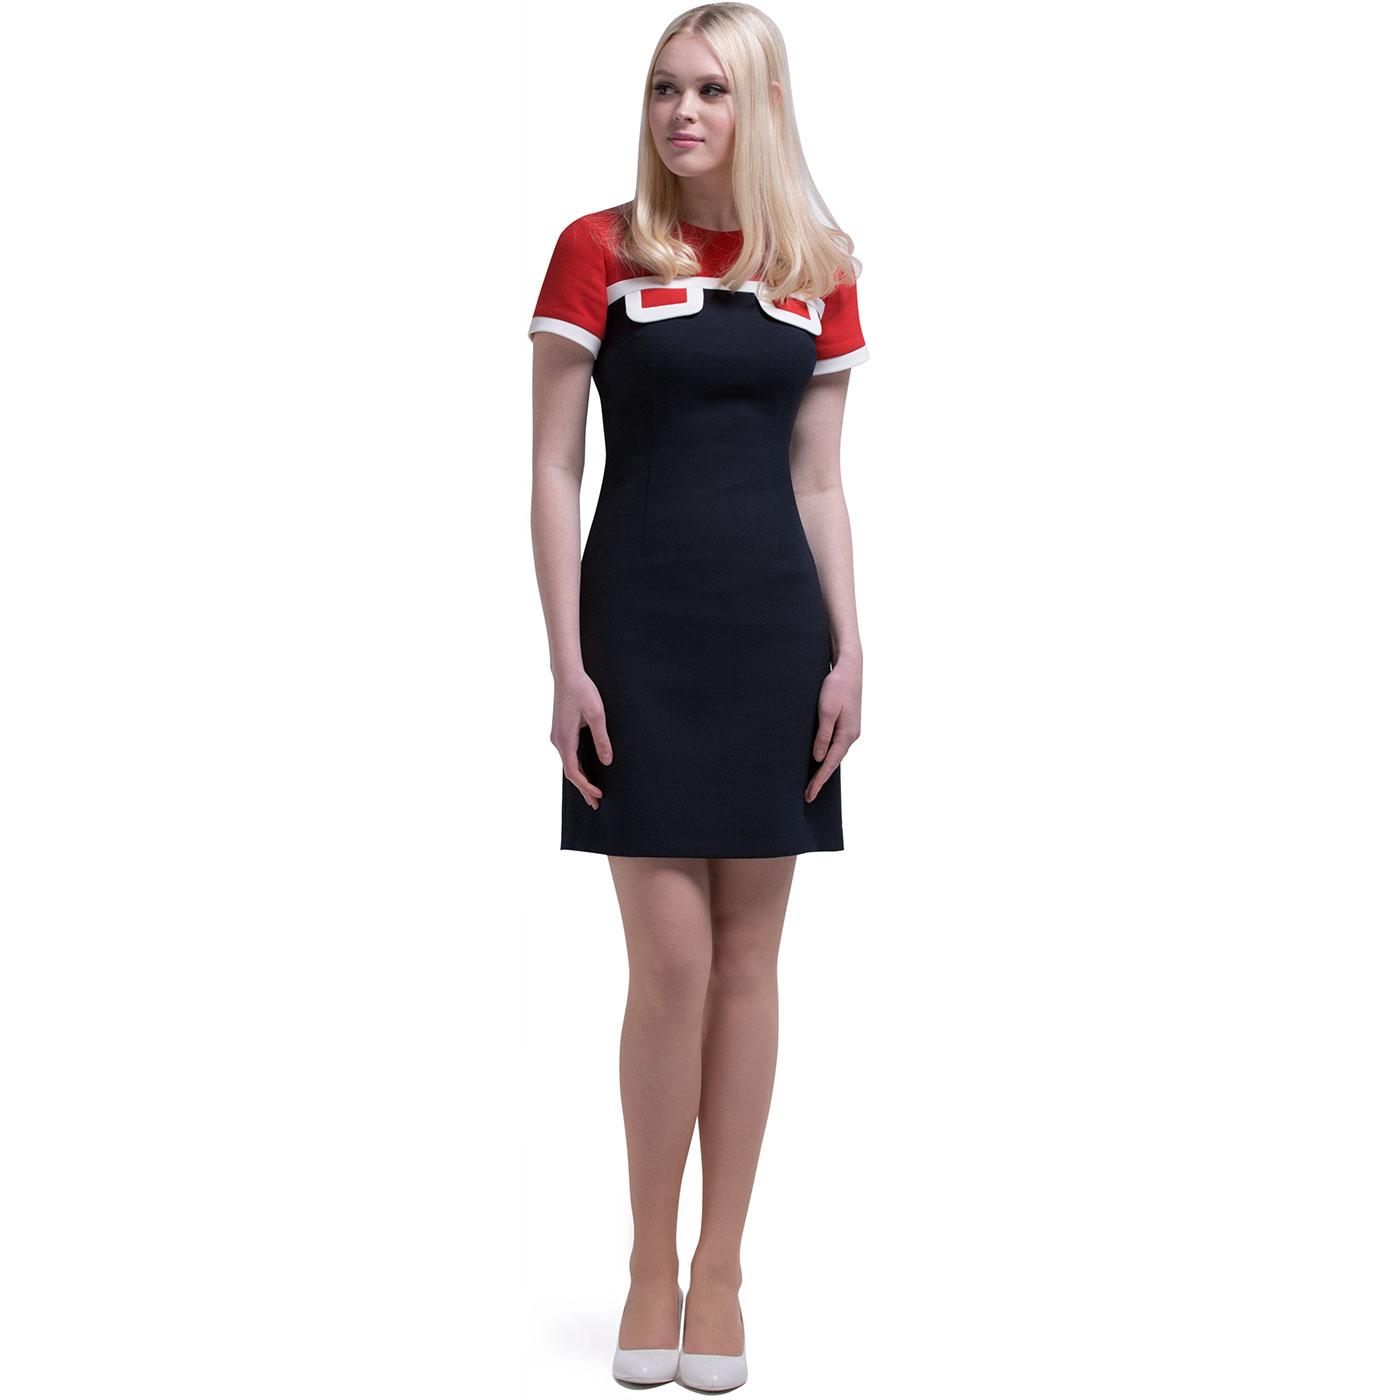 MARMALADE Mod 60s Style Dress with Red Panel